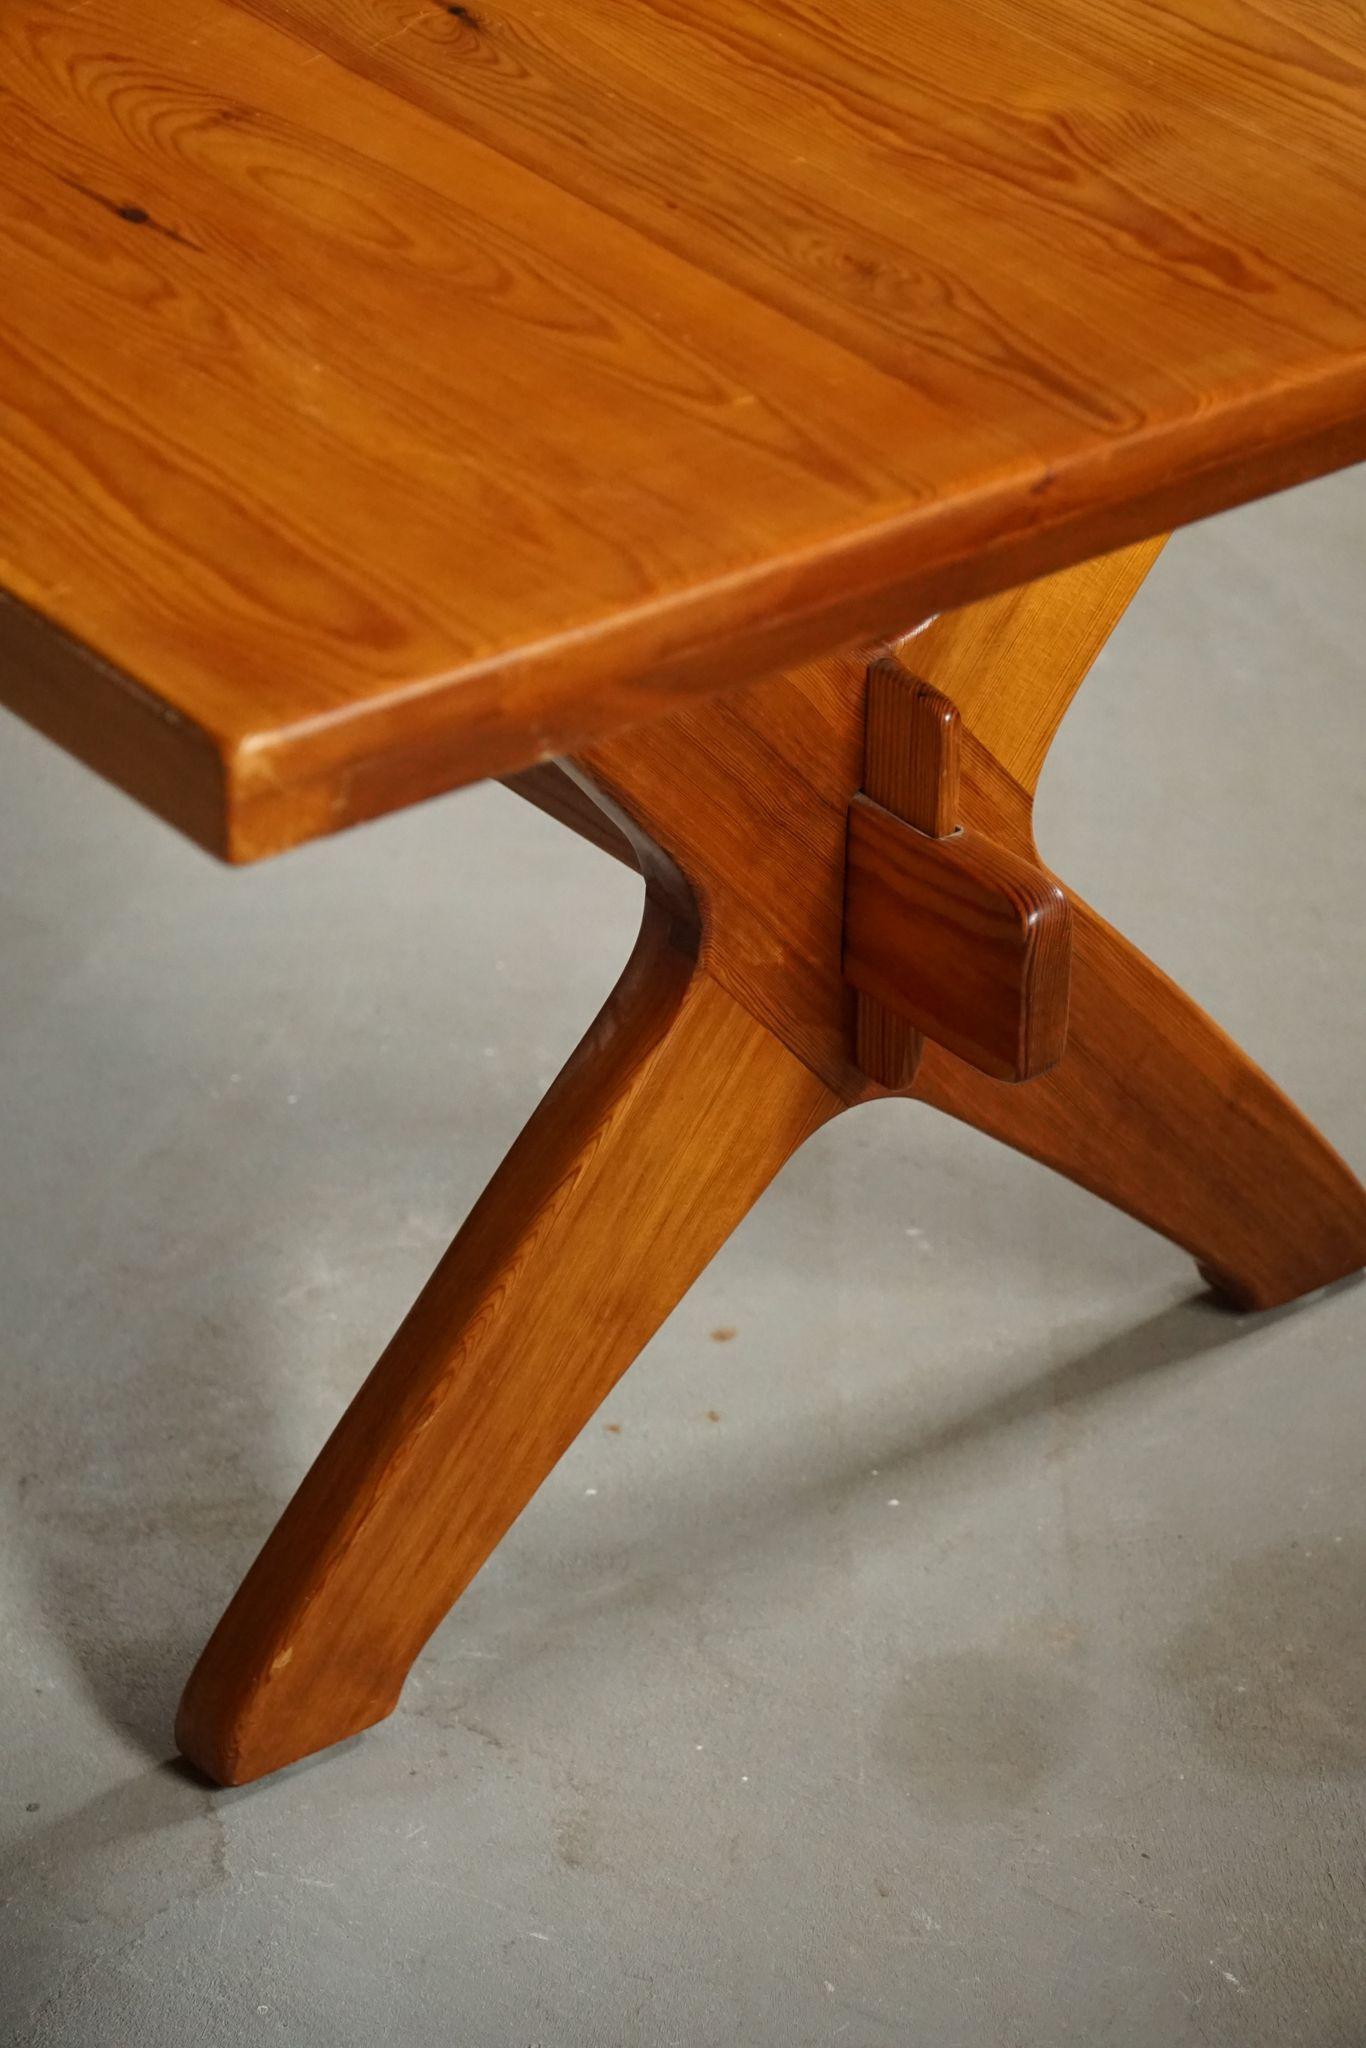 Danish Modern Large Rectangular Coffee Table in Solid Pine, Late 20th Century In Good Condition For Sale In Odense, DK